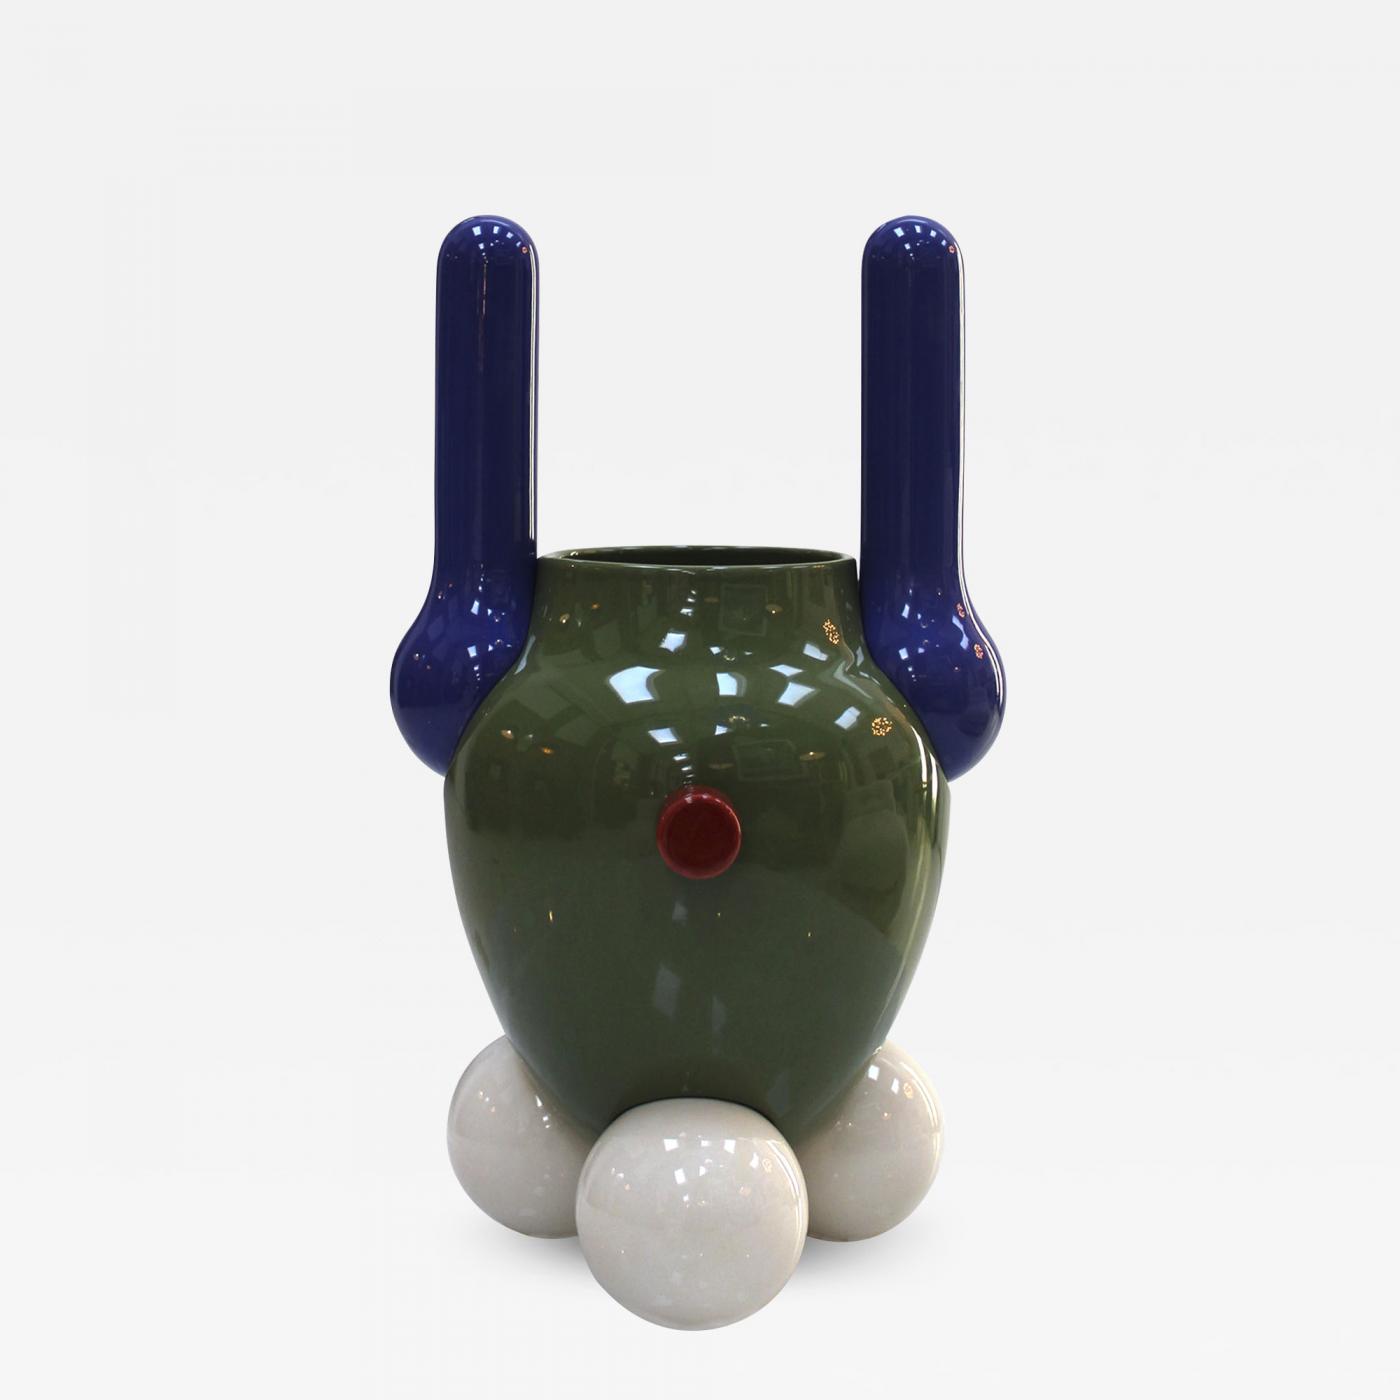 Jaime Hayon - Contemporary Vases Made of Ceramic Designed by Jaime